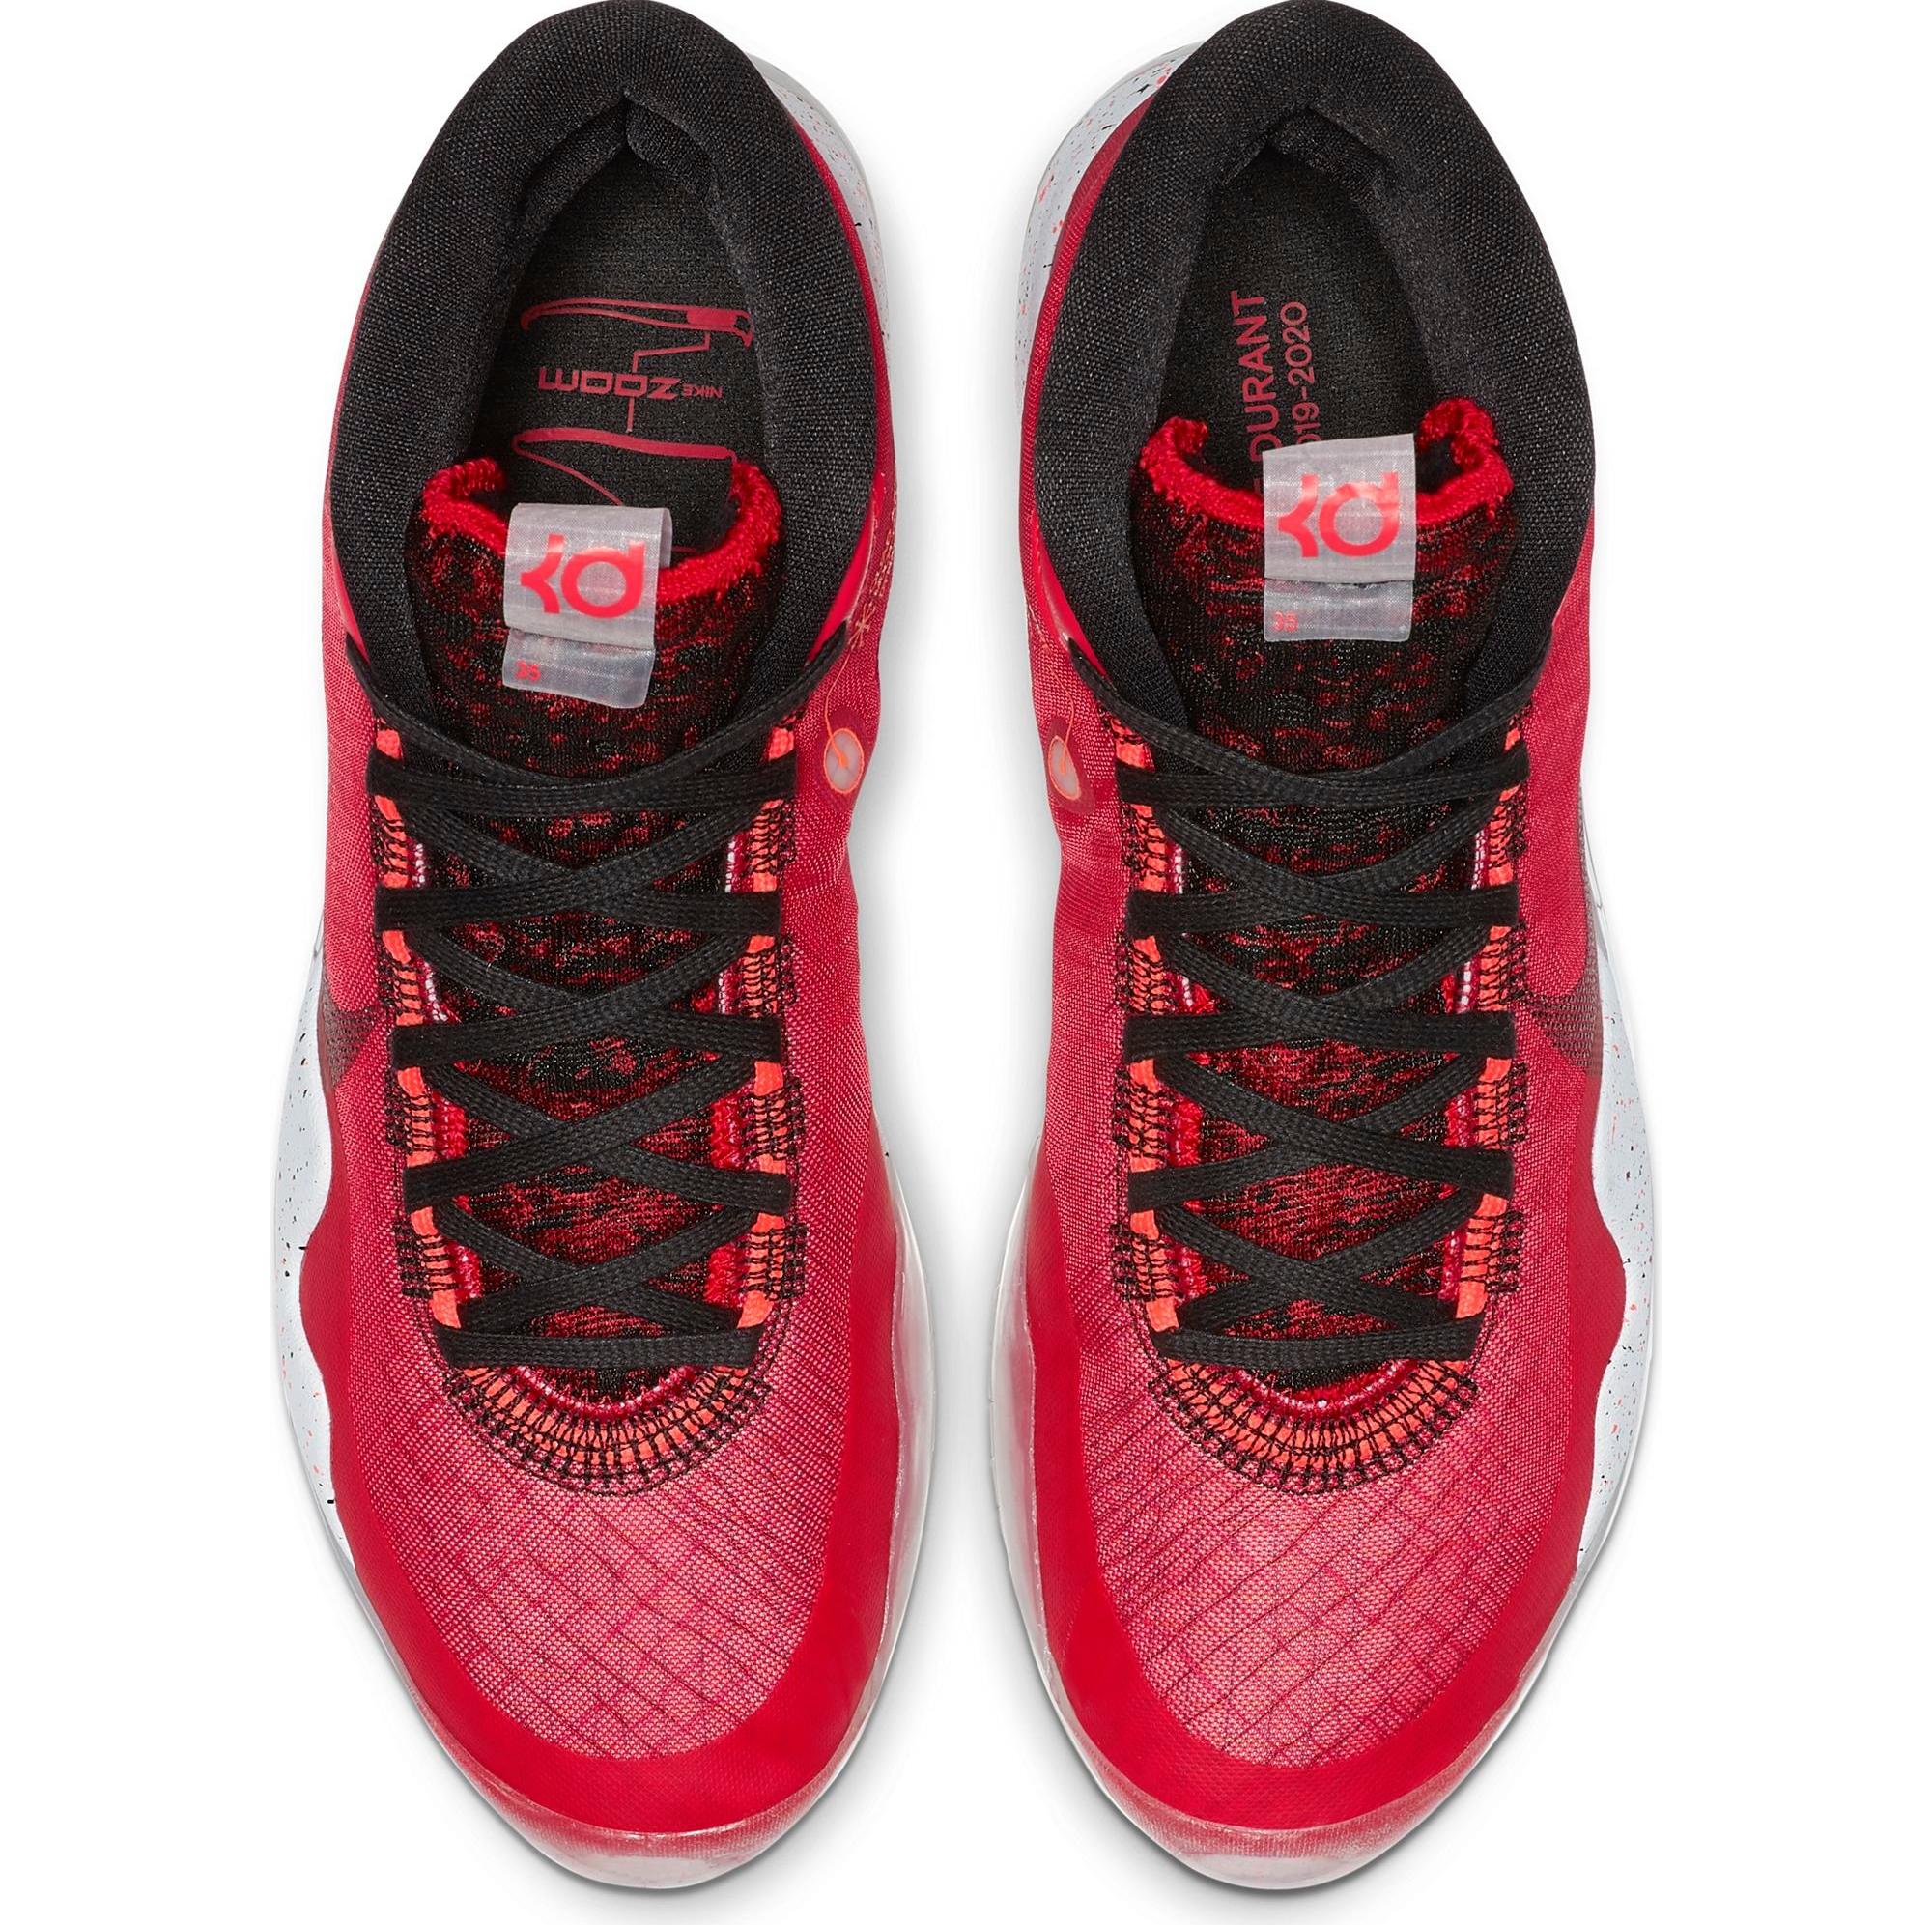 Sneakers Release – Nike Zoom KD 12 “University Red/Black” Basketball Shoes